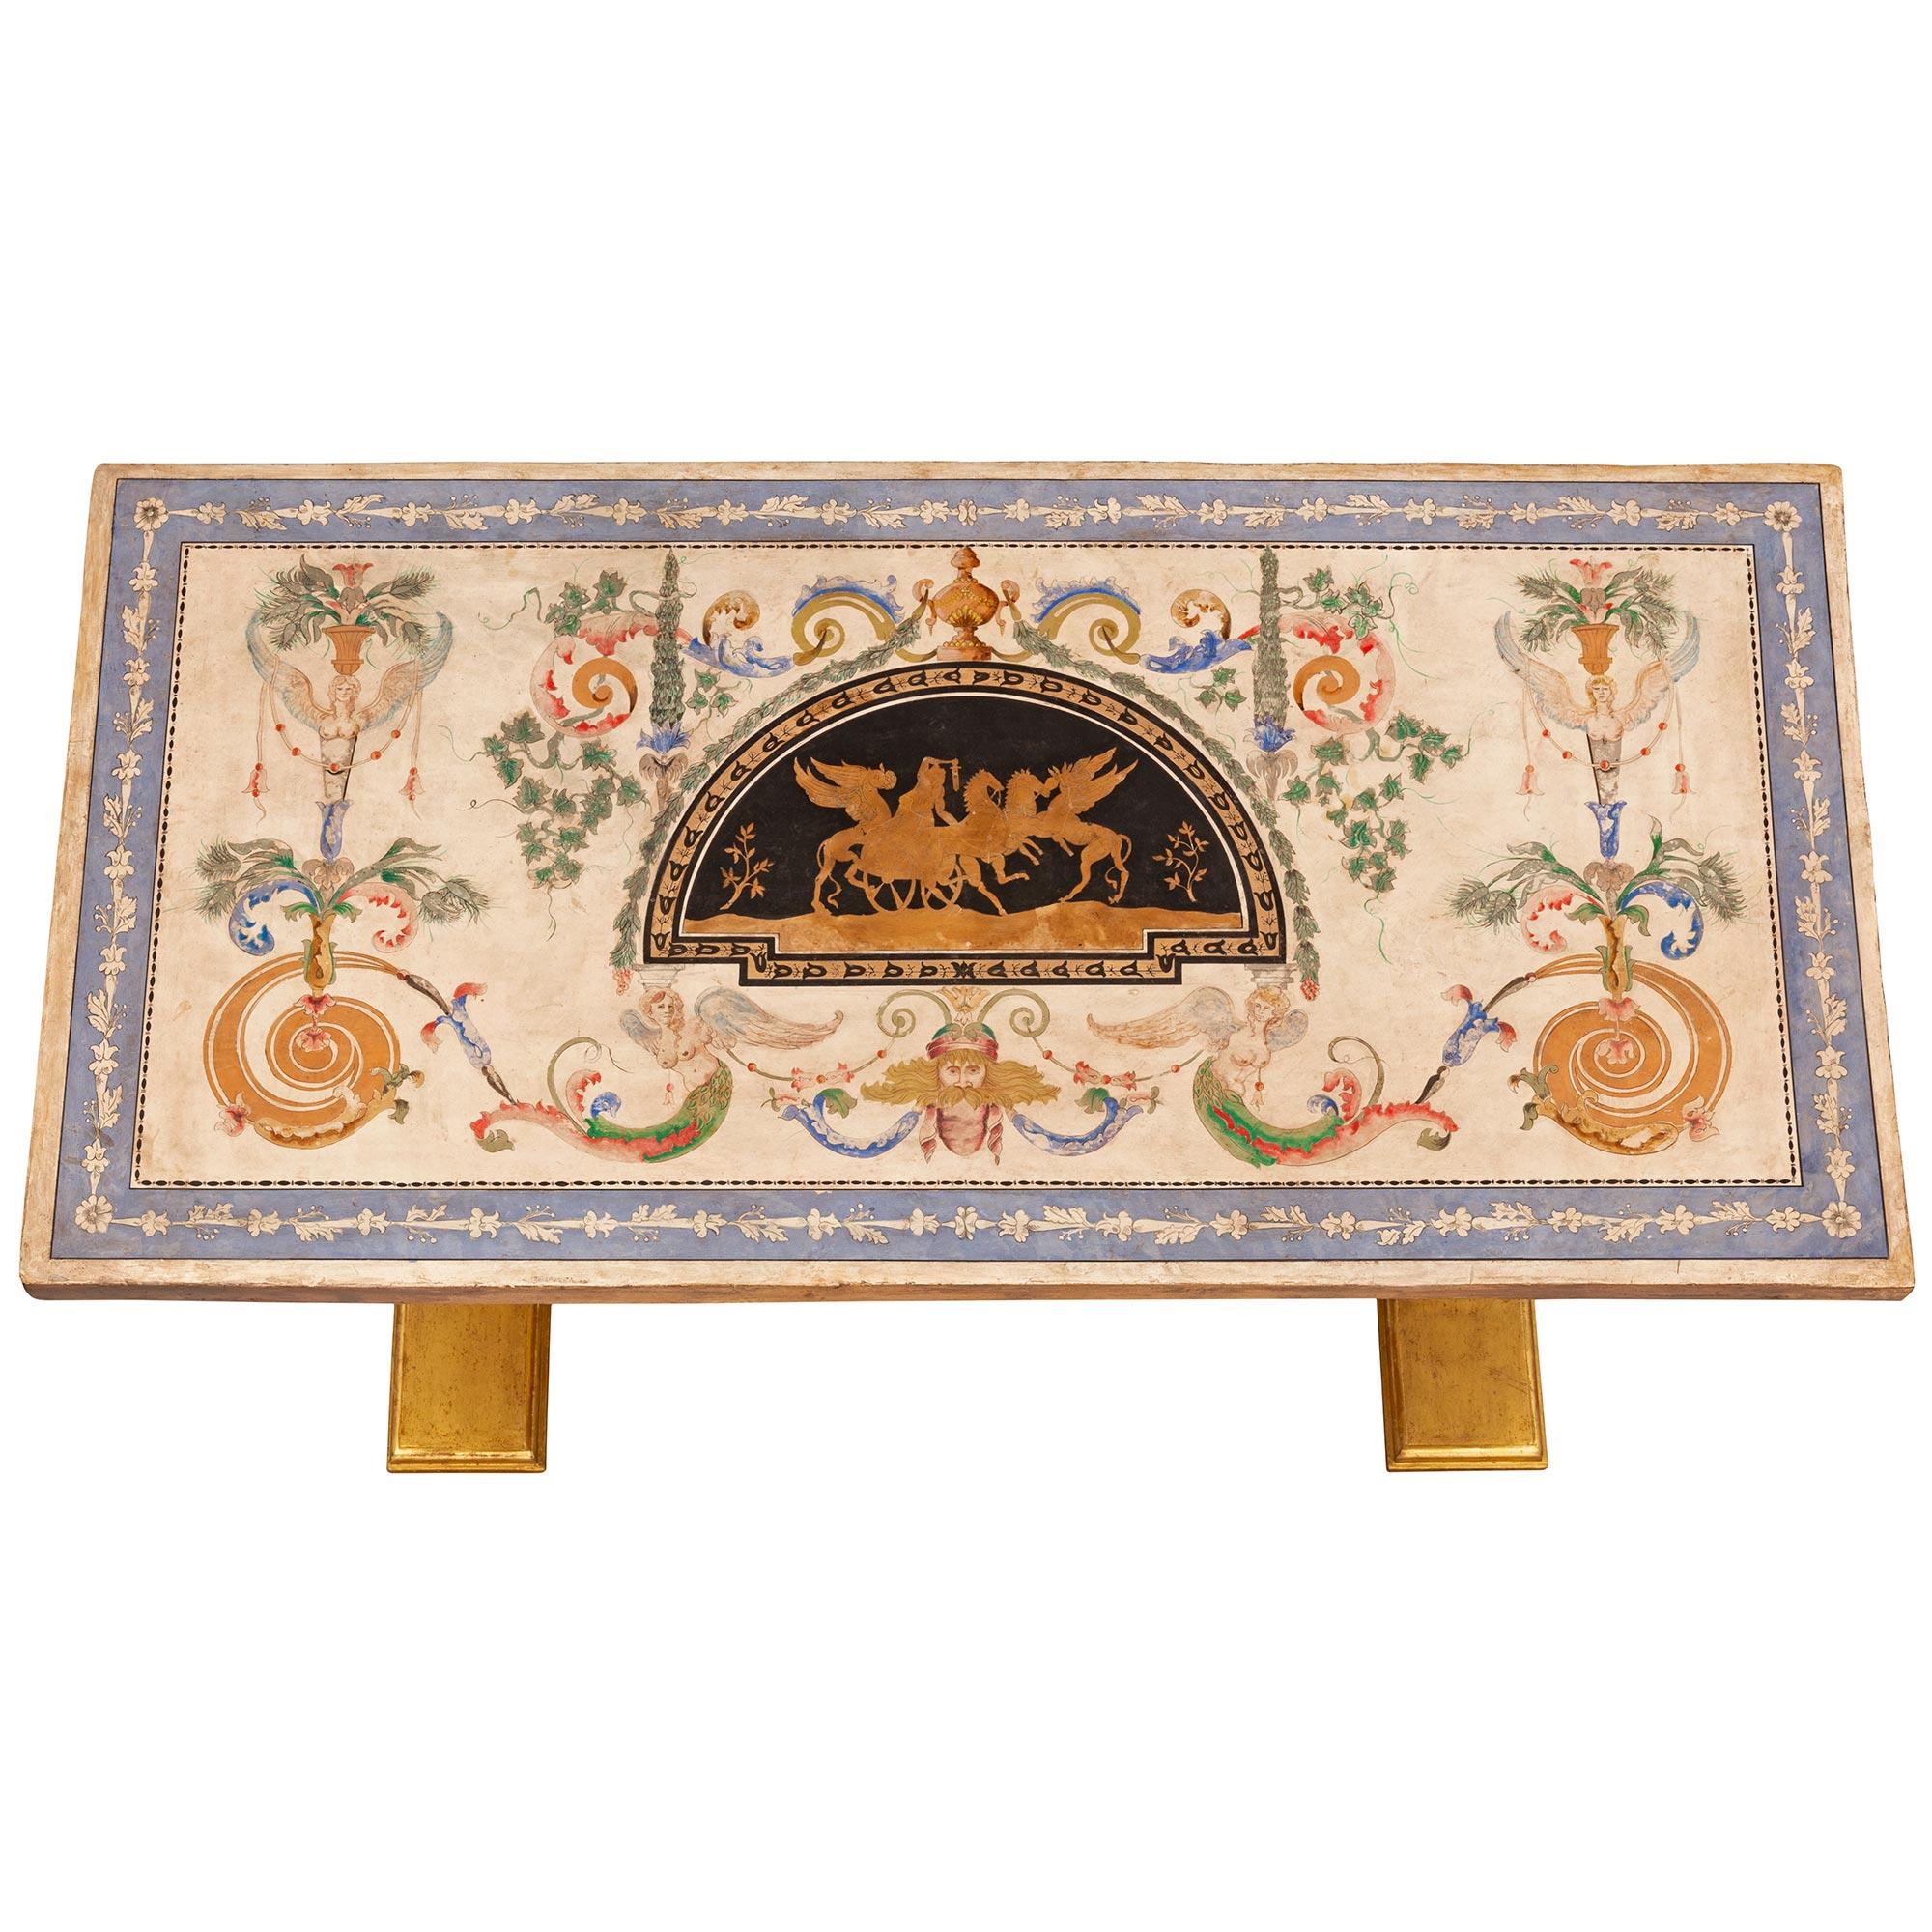 A stunning Italian early 19th century Neo Classical st. giltwood and Scagliola cocktail or coffee table. The rectangular table is raised by a fine H shaped support with a lovely mottled border. The impressive supports at each side display handsome